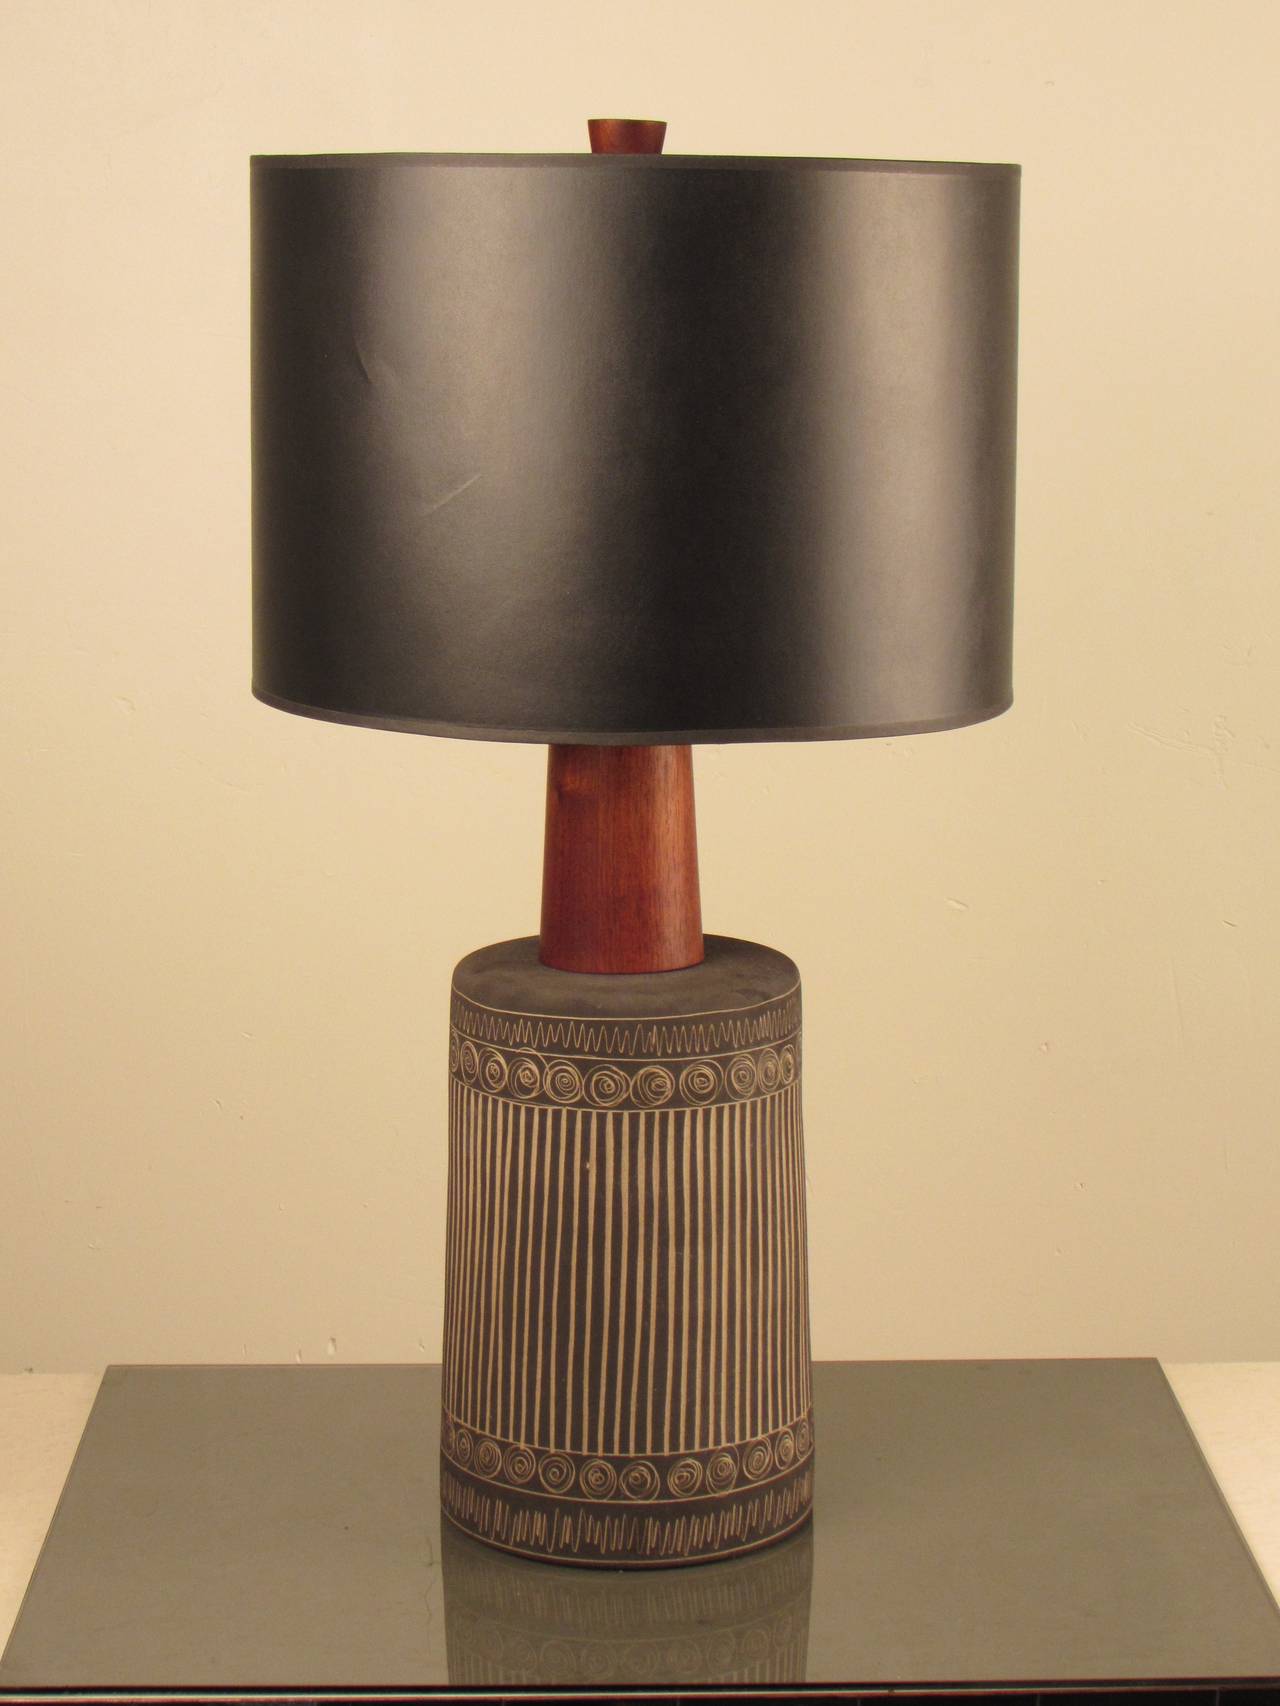 Choice example of the work of Gordon + Jane Martz for Marshall Studios. Lovely matte graphite glaze with intricate incised decoration and original walnut finial. 
Black shade with metallic gold lining is not original to the lamp, but we are happy